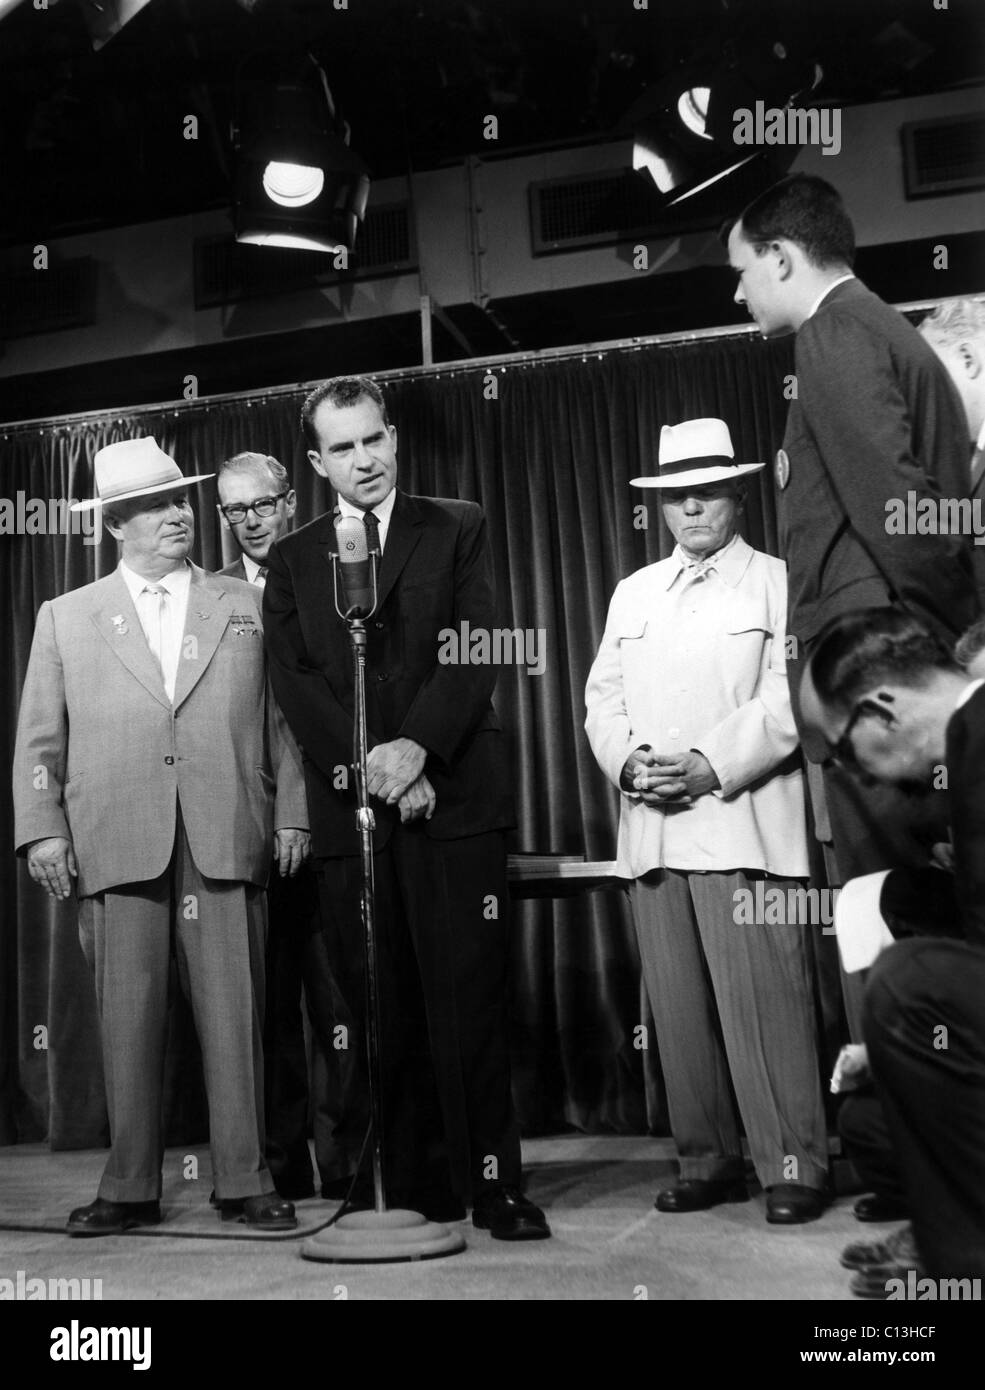 Russian premier Nikita Khrushchev (left), U.S. Vice President Richard Nixon (at microphone) at the American Fair in Moscow where the famous 'Kitchen Debate' took place, August, 1959 Stock Photo